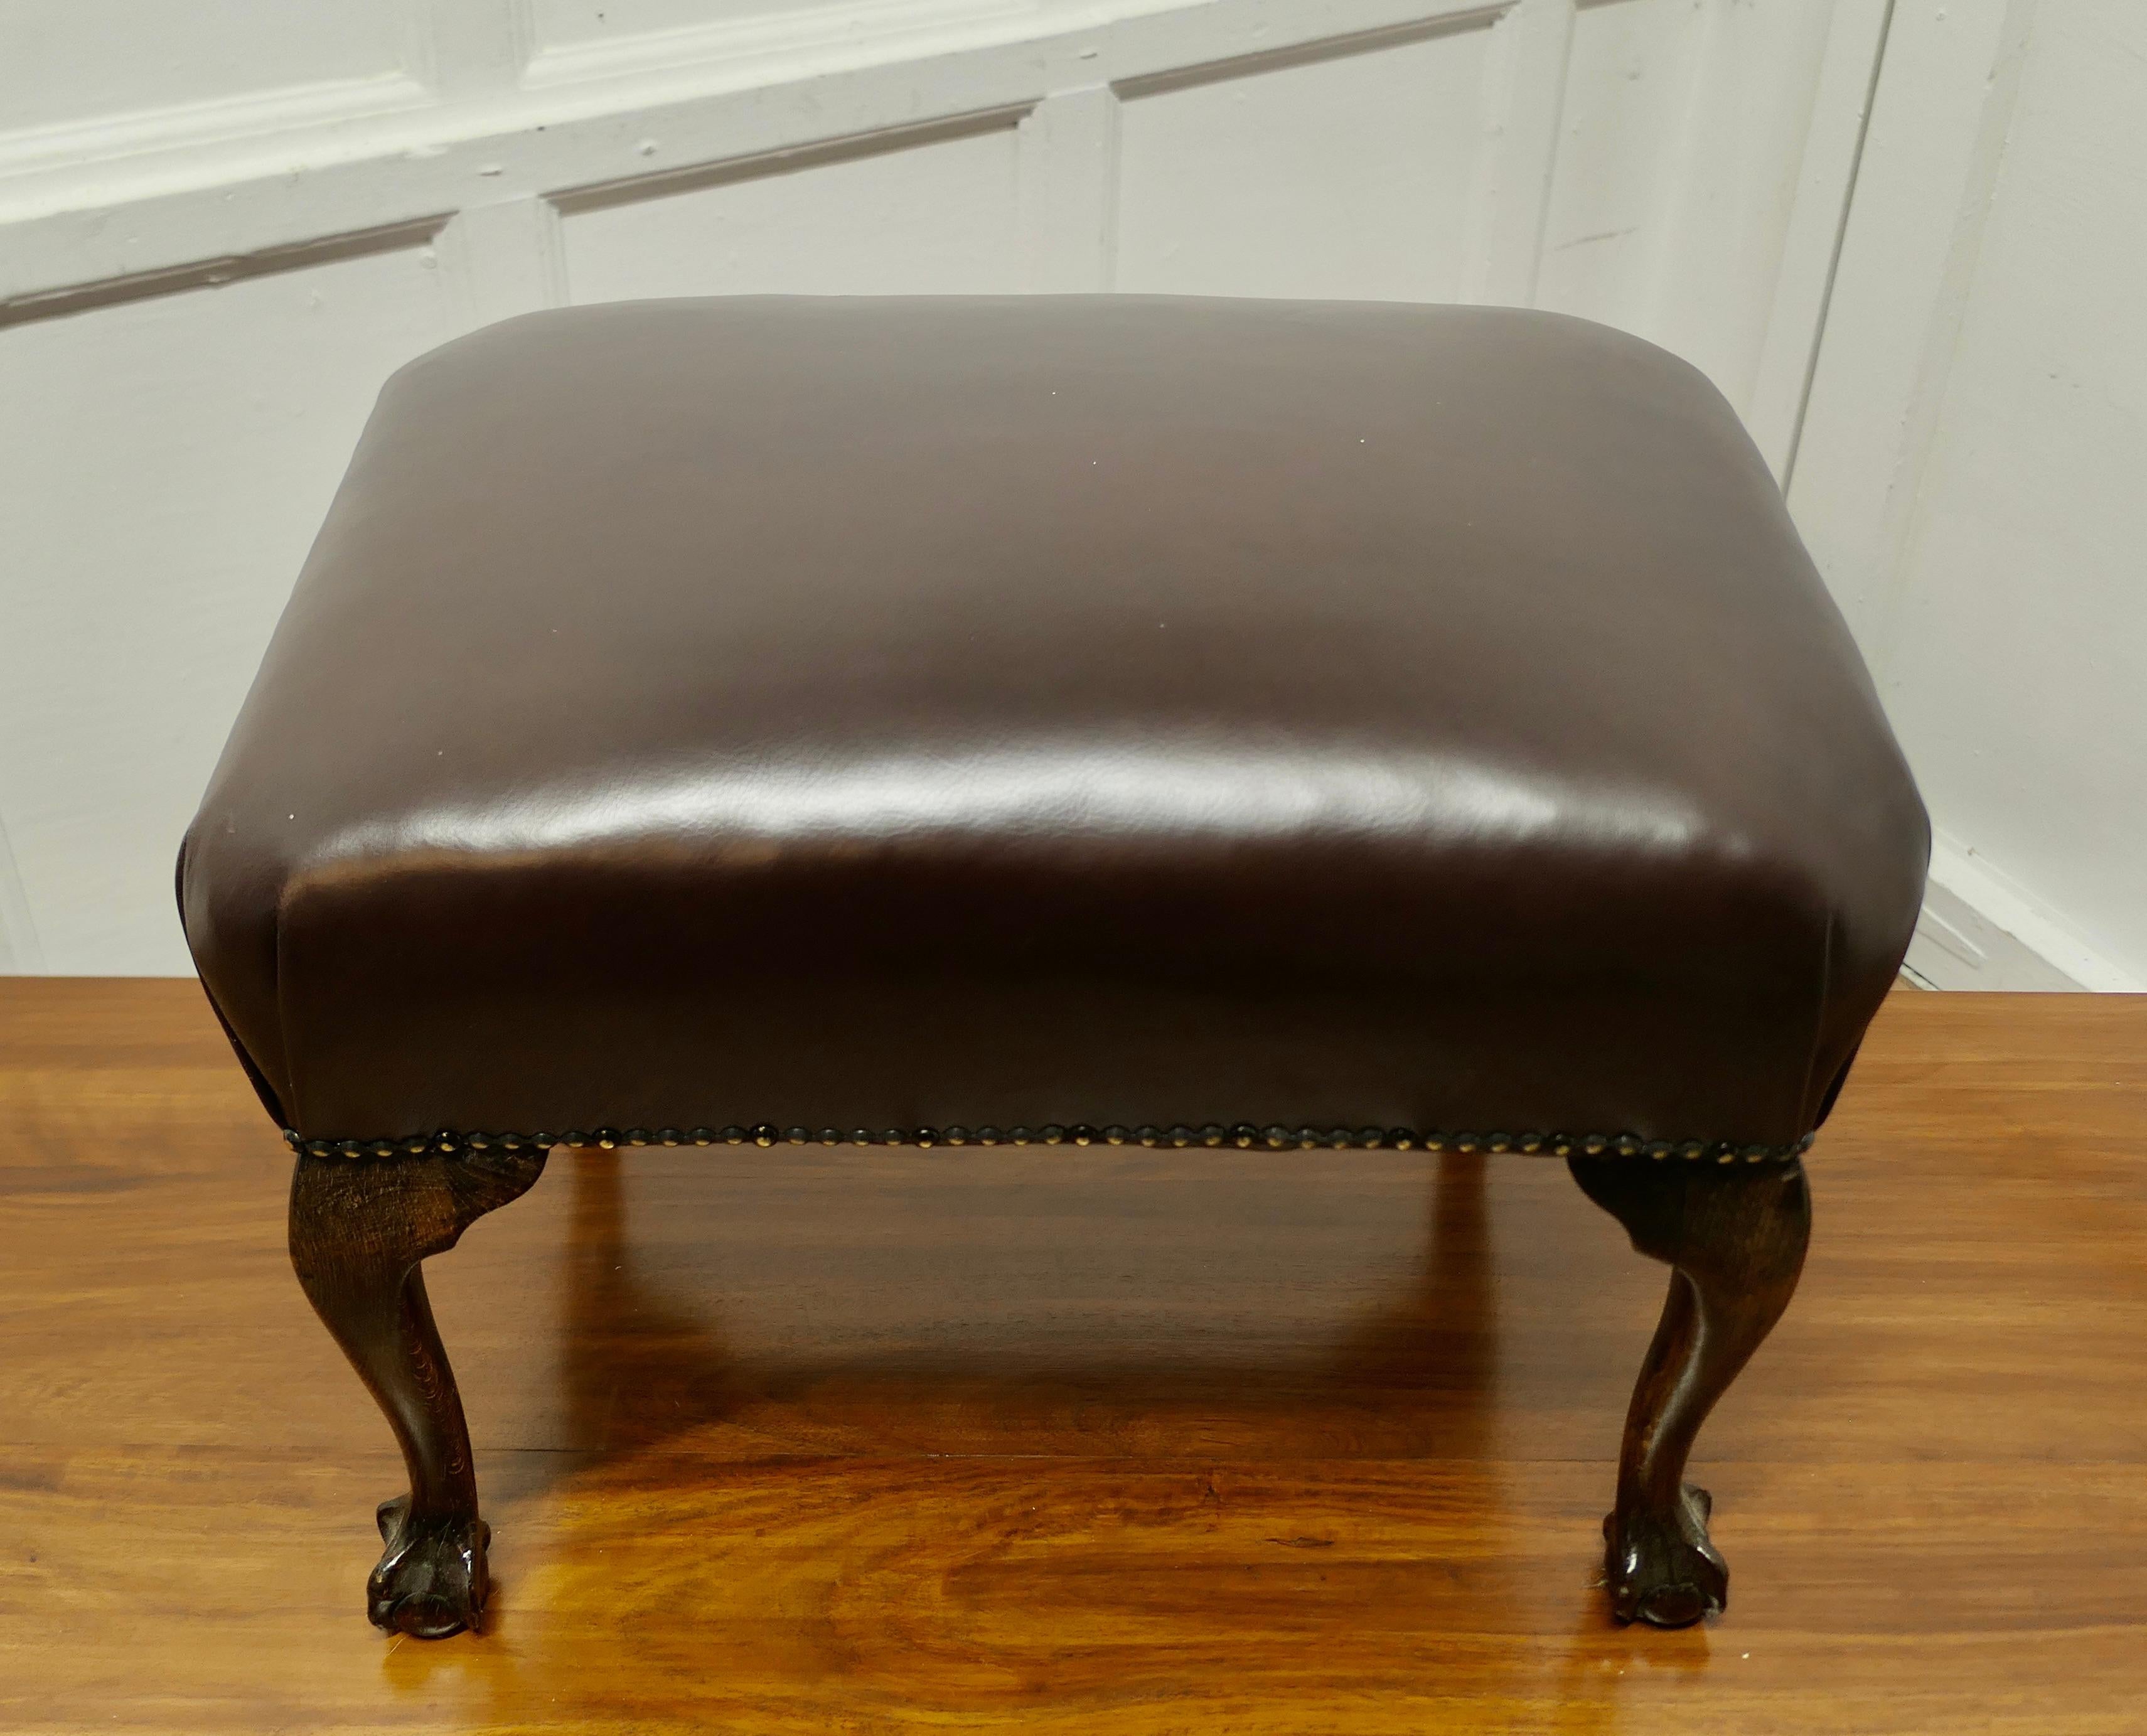 Chunky Oak Cabriole Leg Leather Library Stool  

This is a good Sturdy Stool it has strong cabriole legs 
The stool is upholstered in brown Leather and studded around the edges
This sturdy Stool would work well in almost any room and it is in good